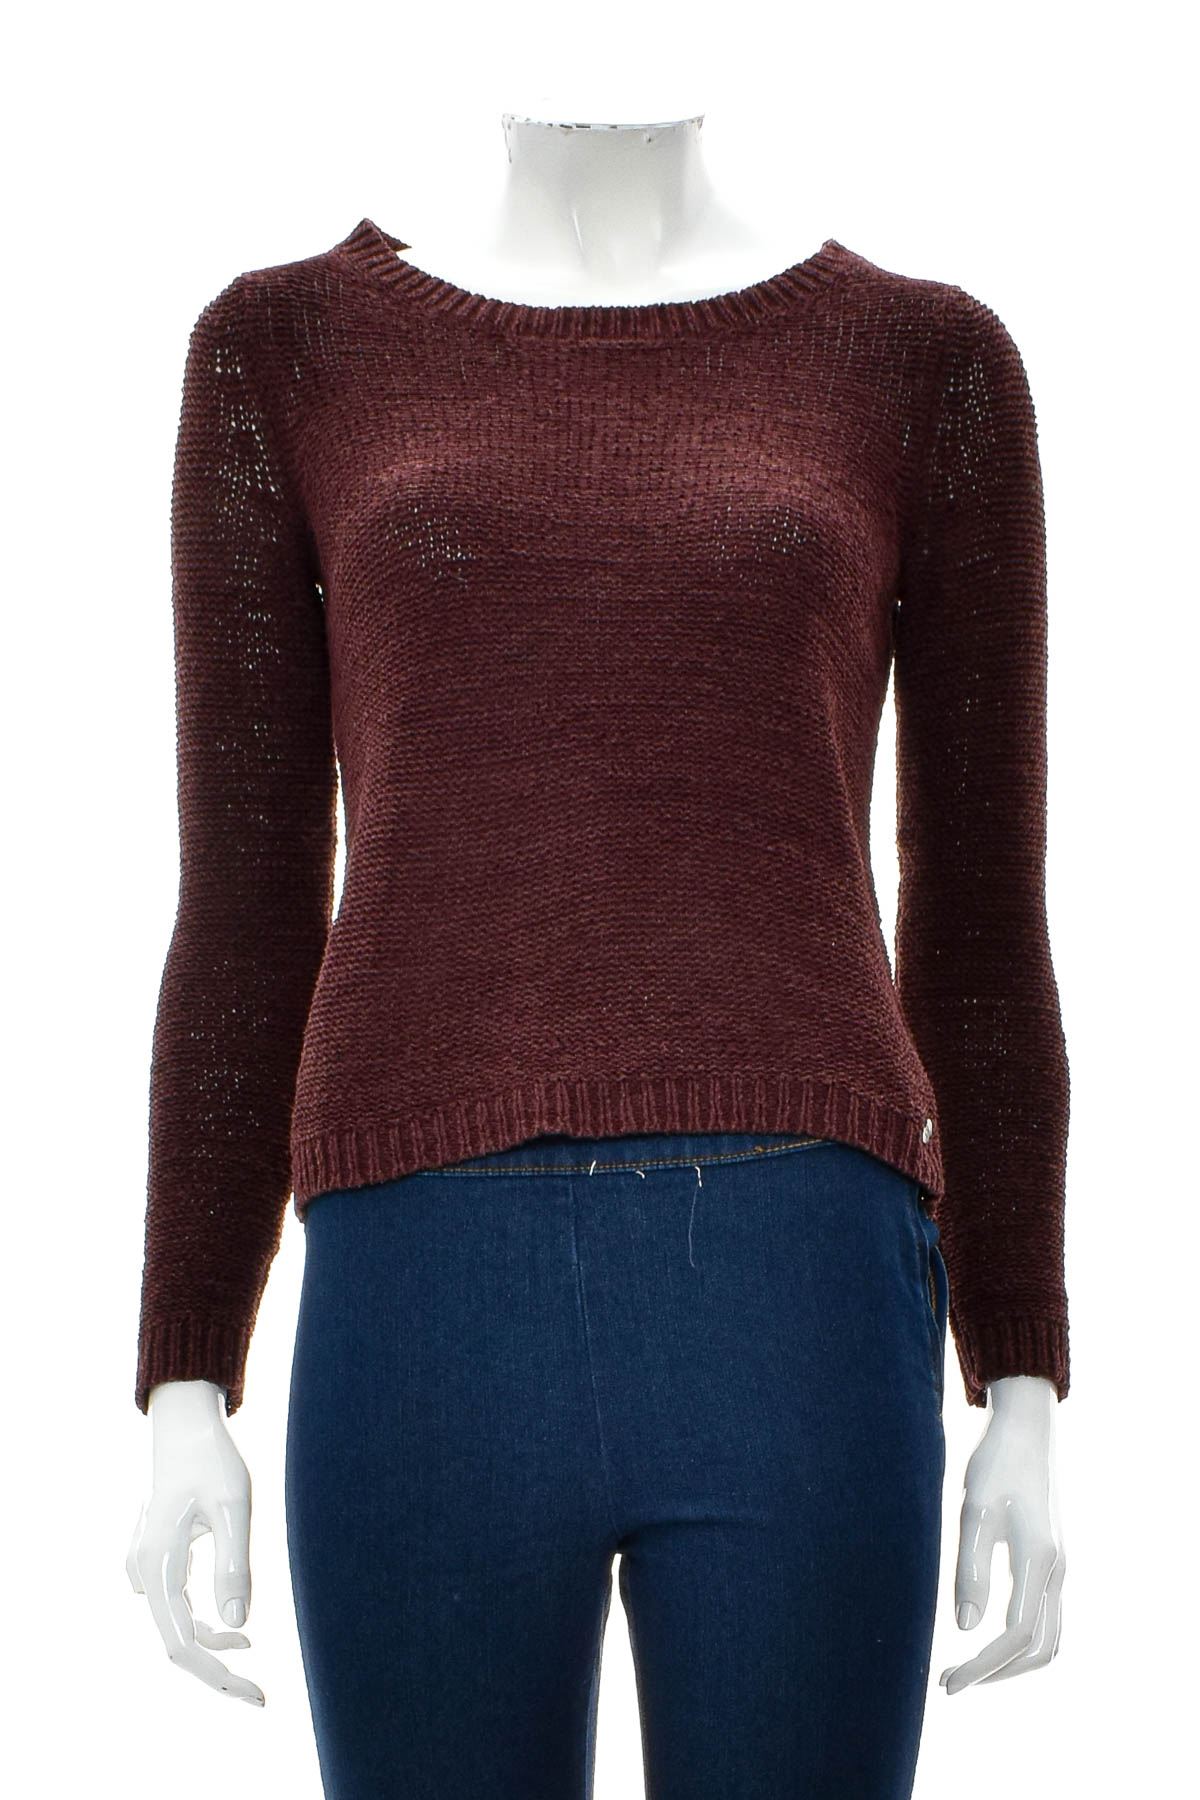 Women's sweater - ONLY - 0